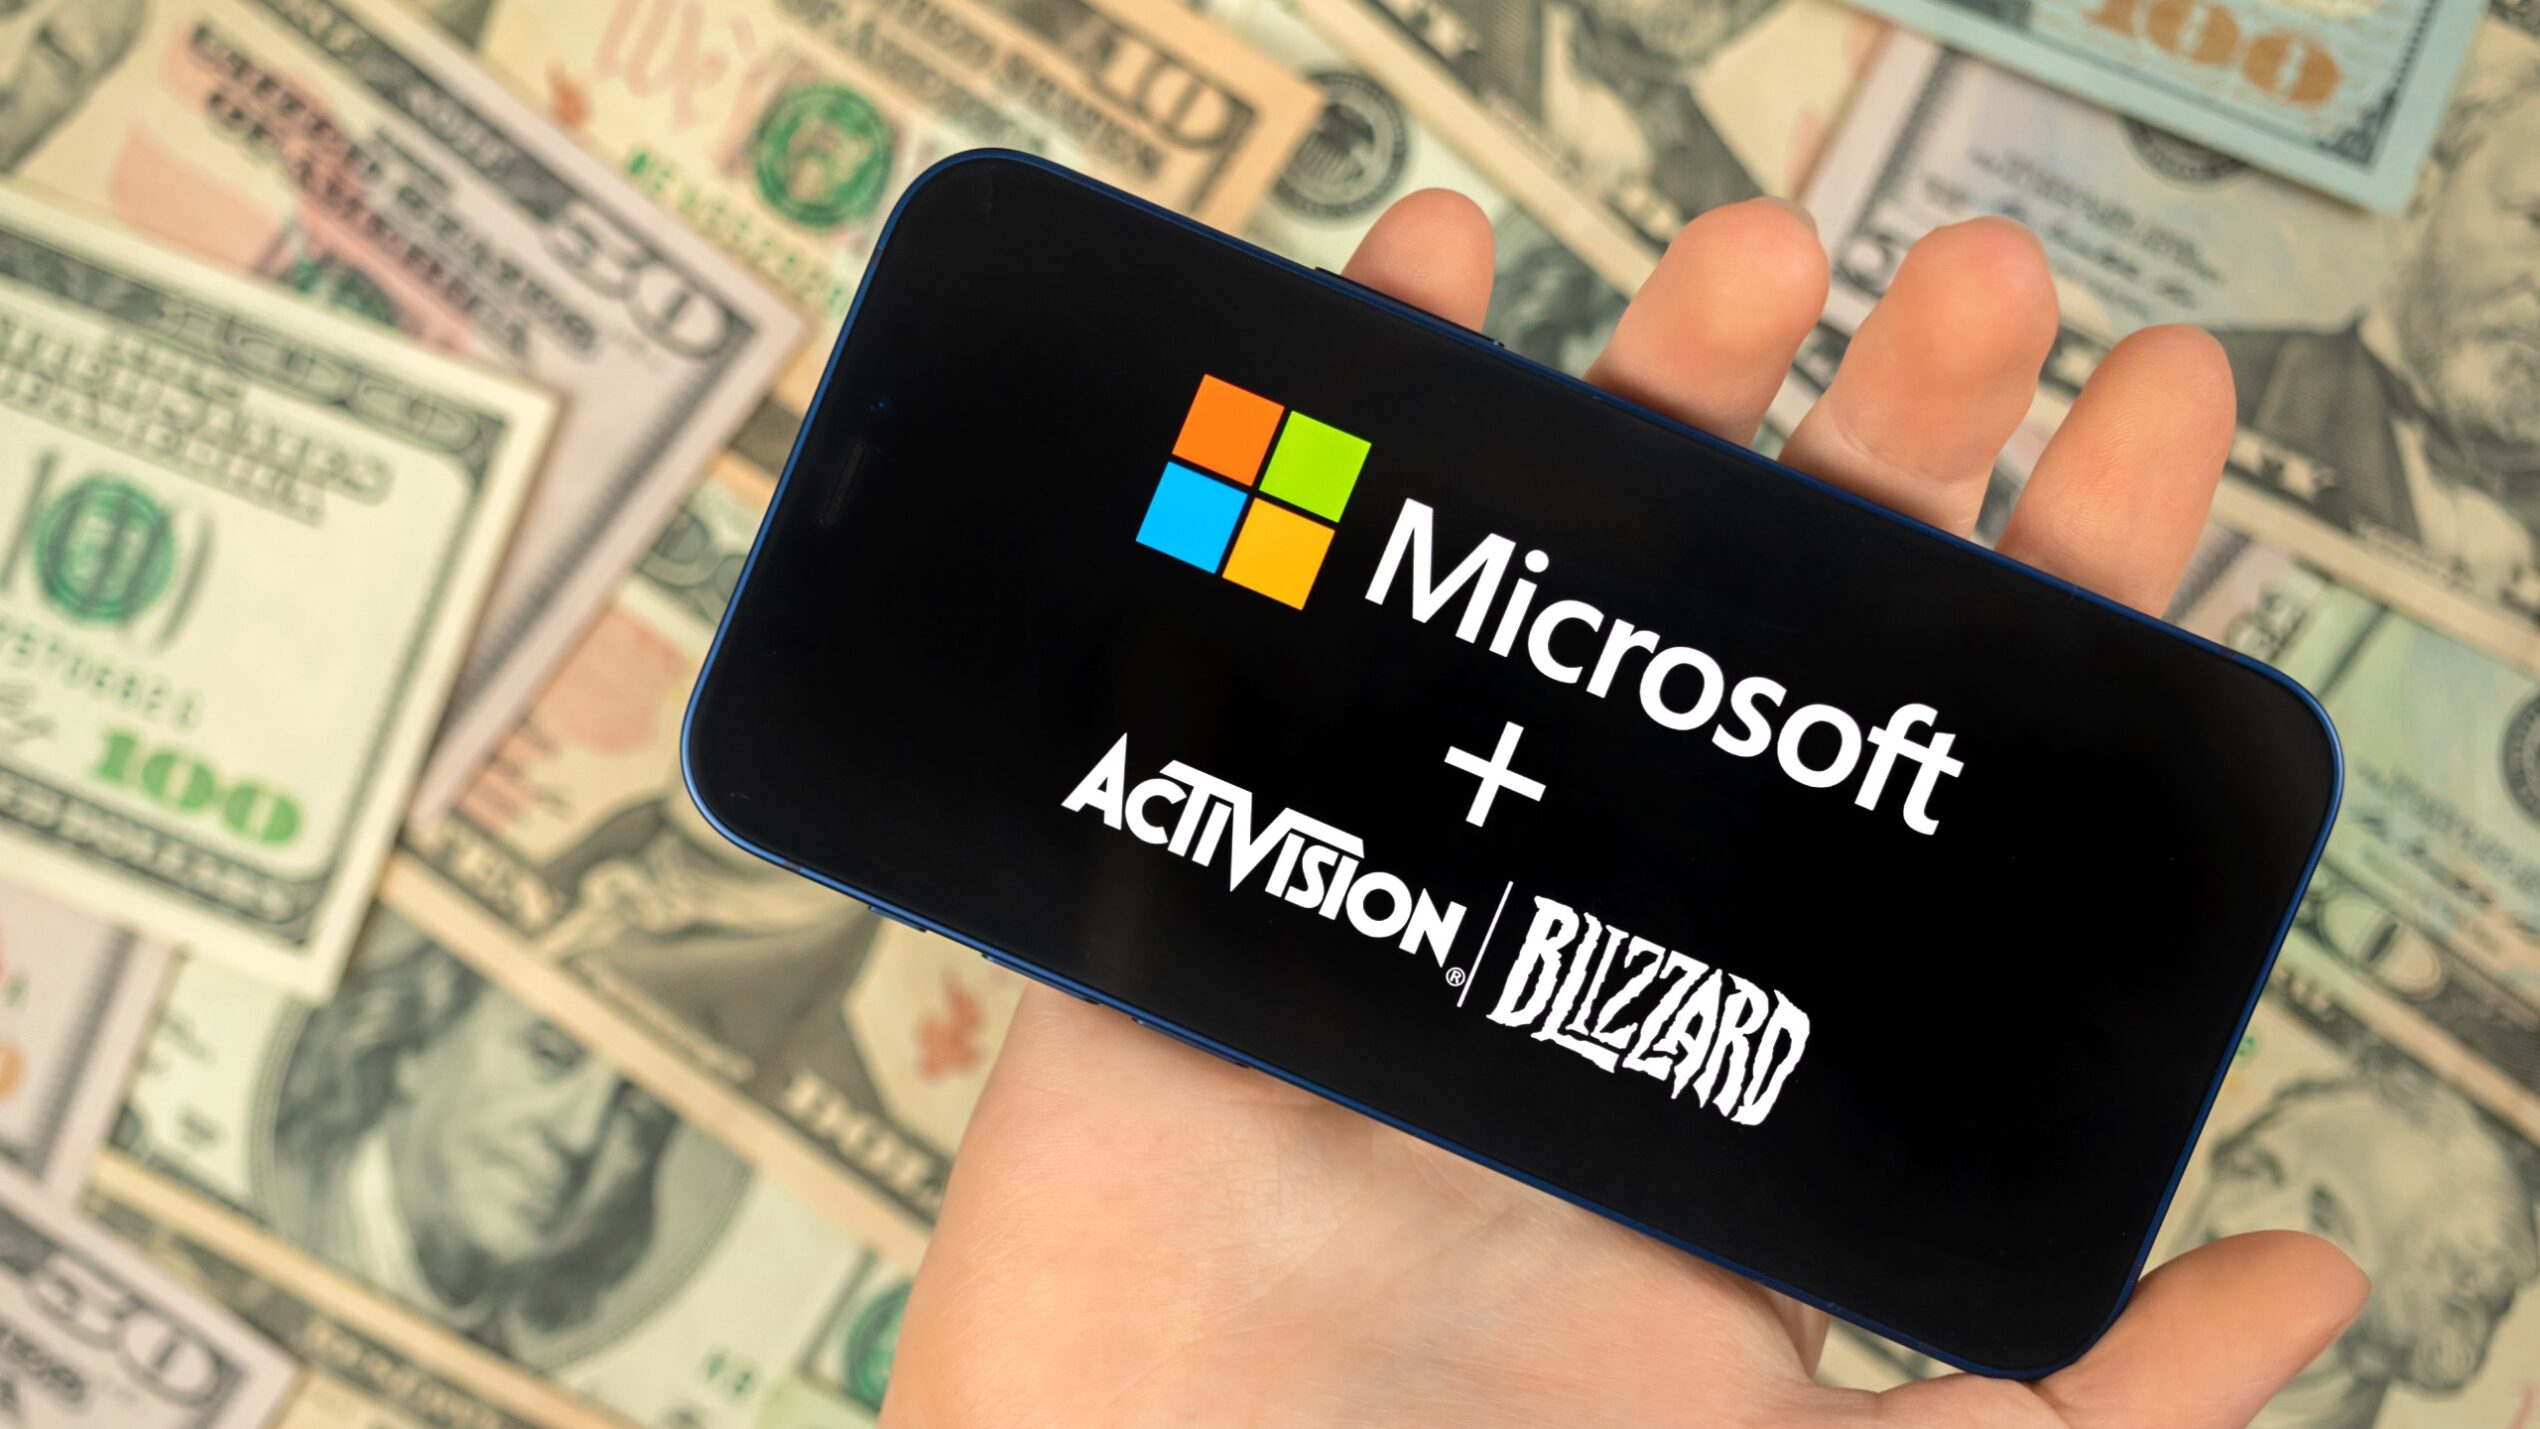 Video Gamers File to Stop Microsoft’s Acquisition of Activision